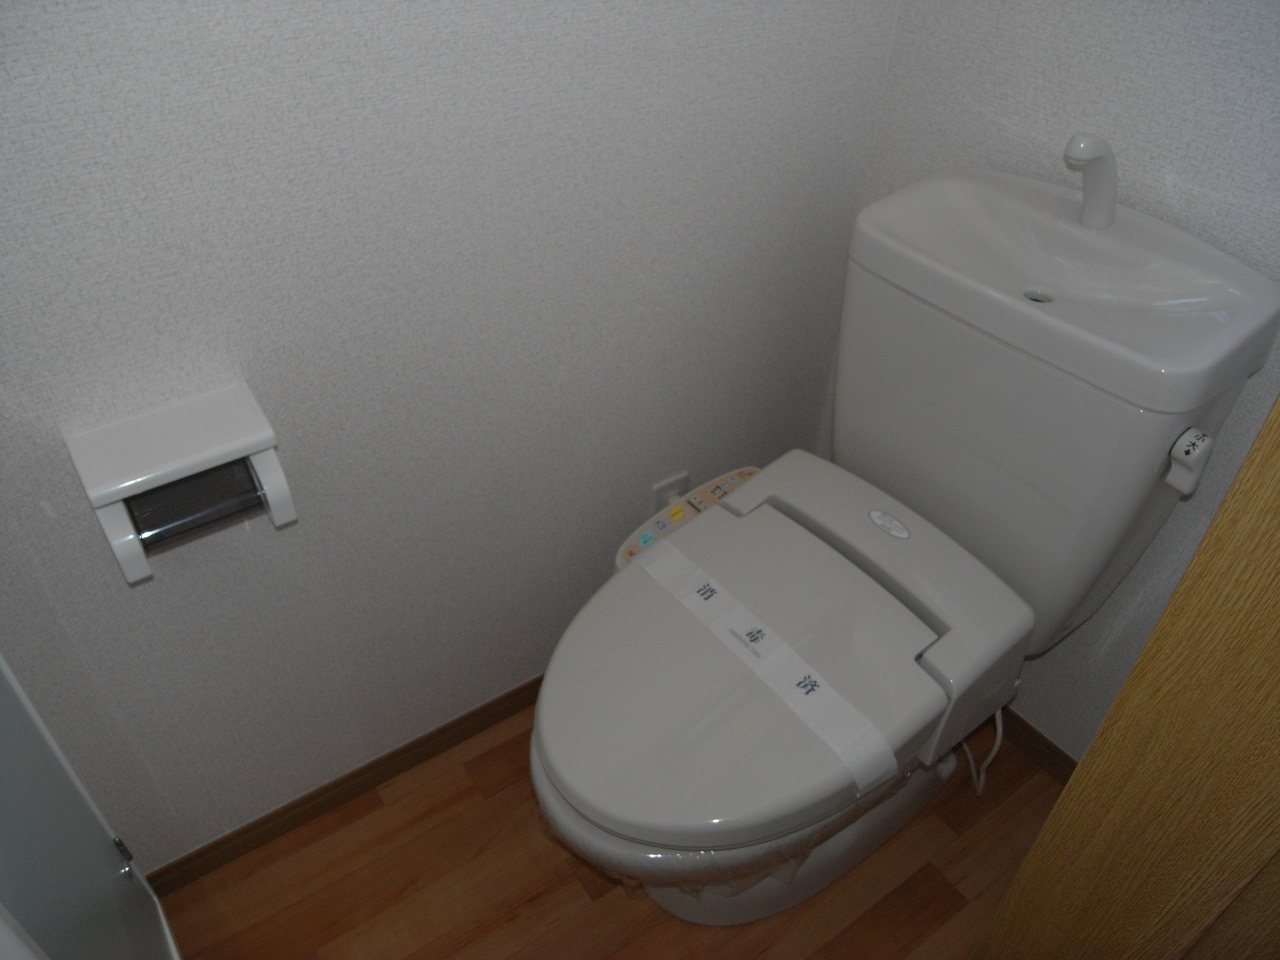 Toilet. Heating toilet seat with shower